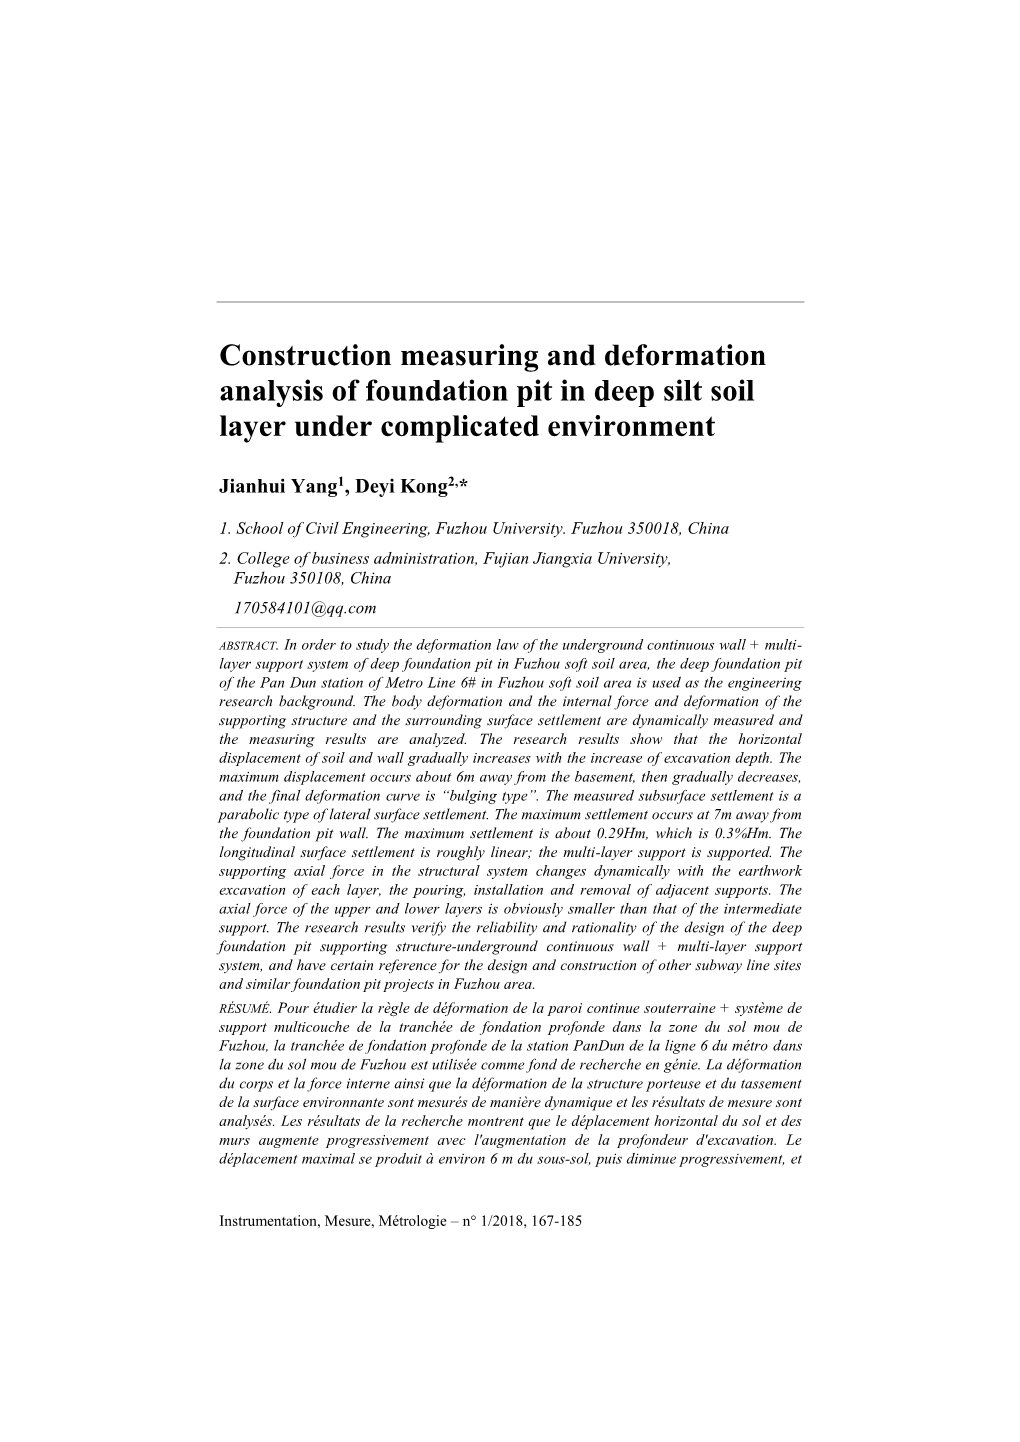 Construction Measuring and Deformation Analysis of Foundation Pit in Deep Silt Soil Layer Under Complicated Environment